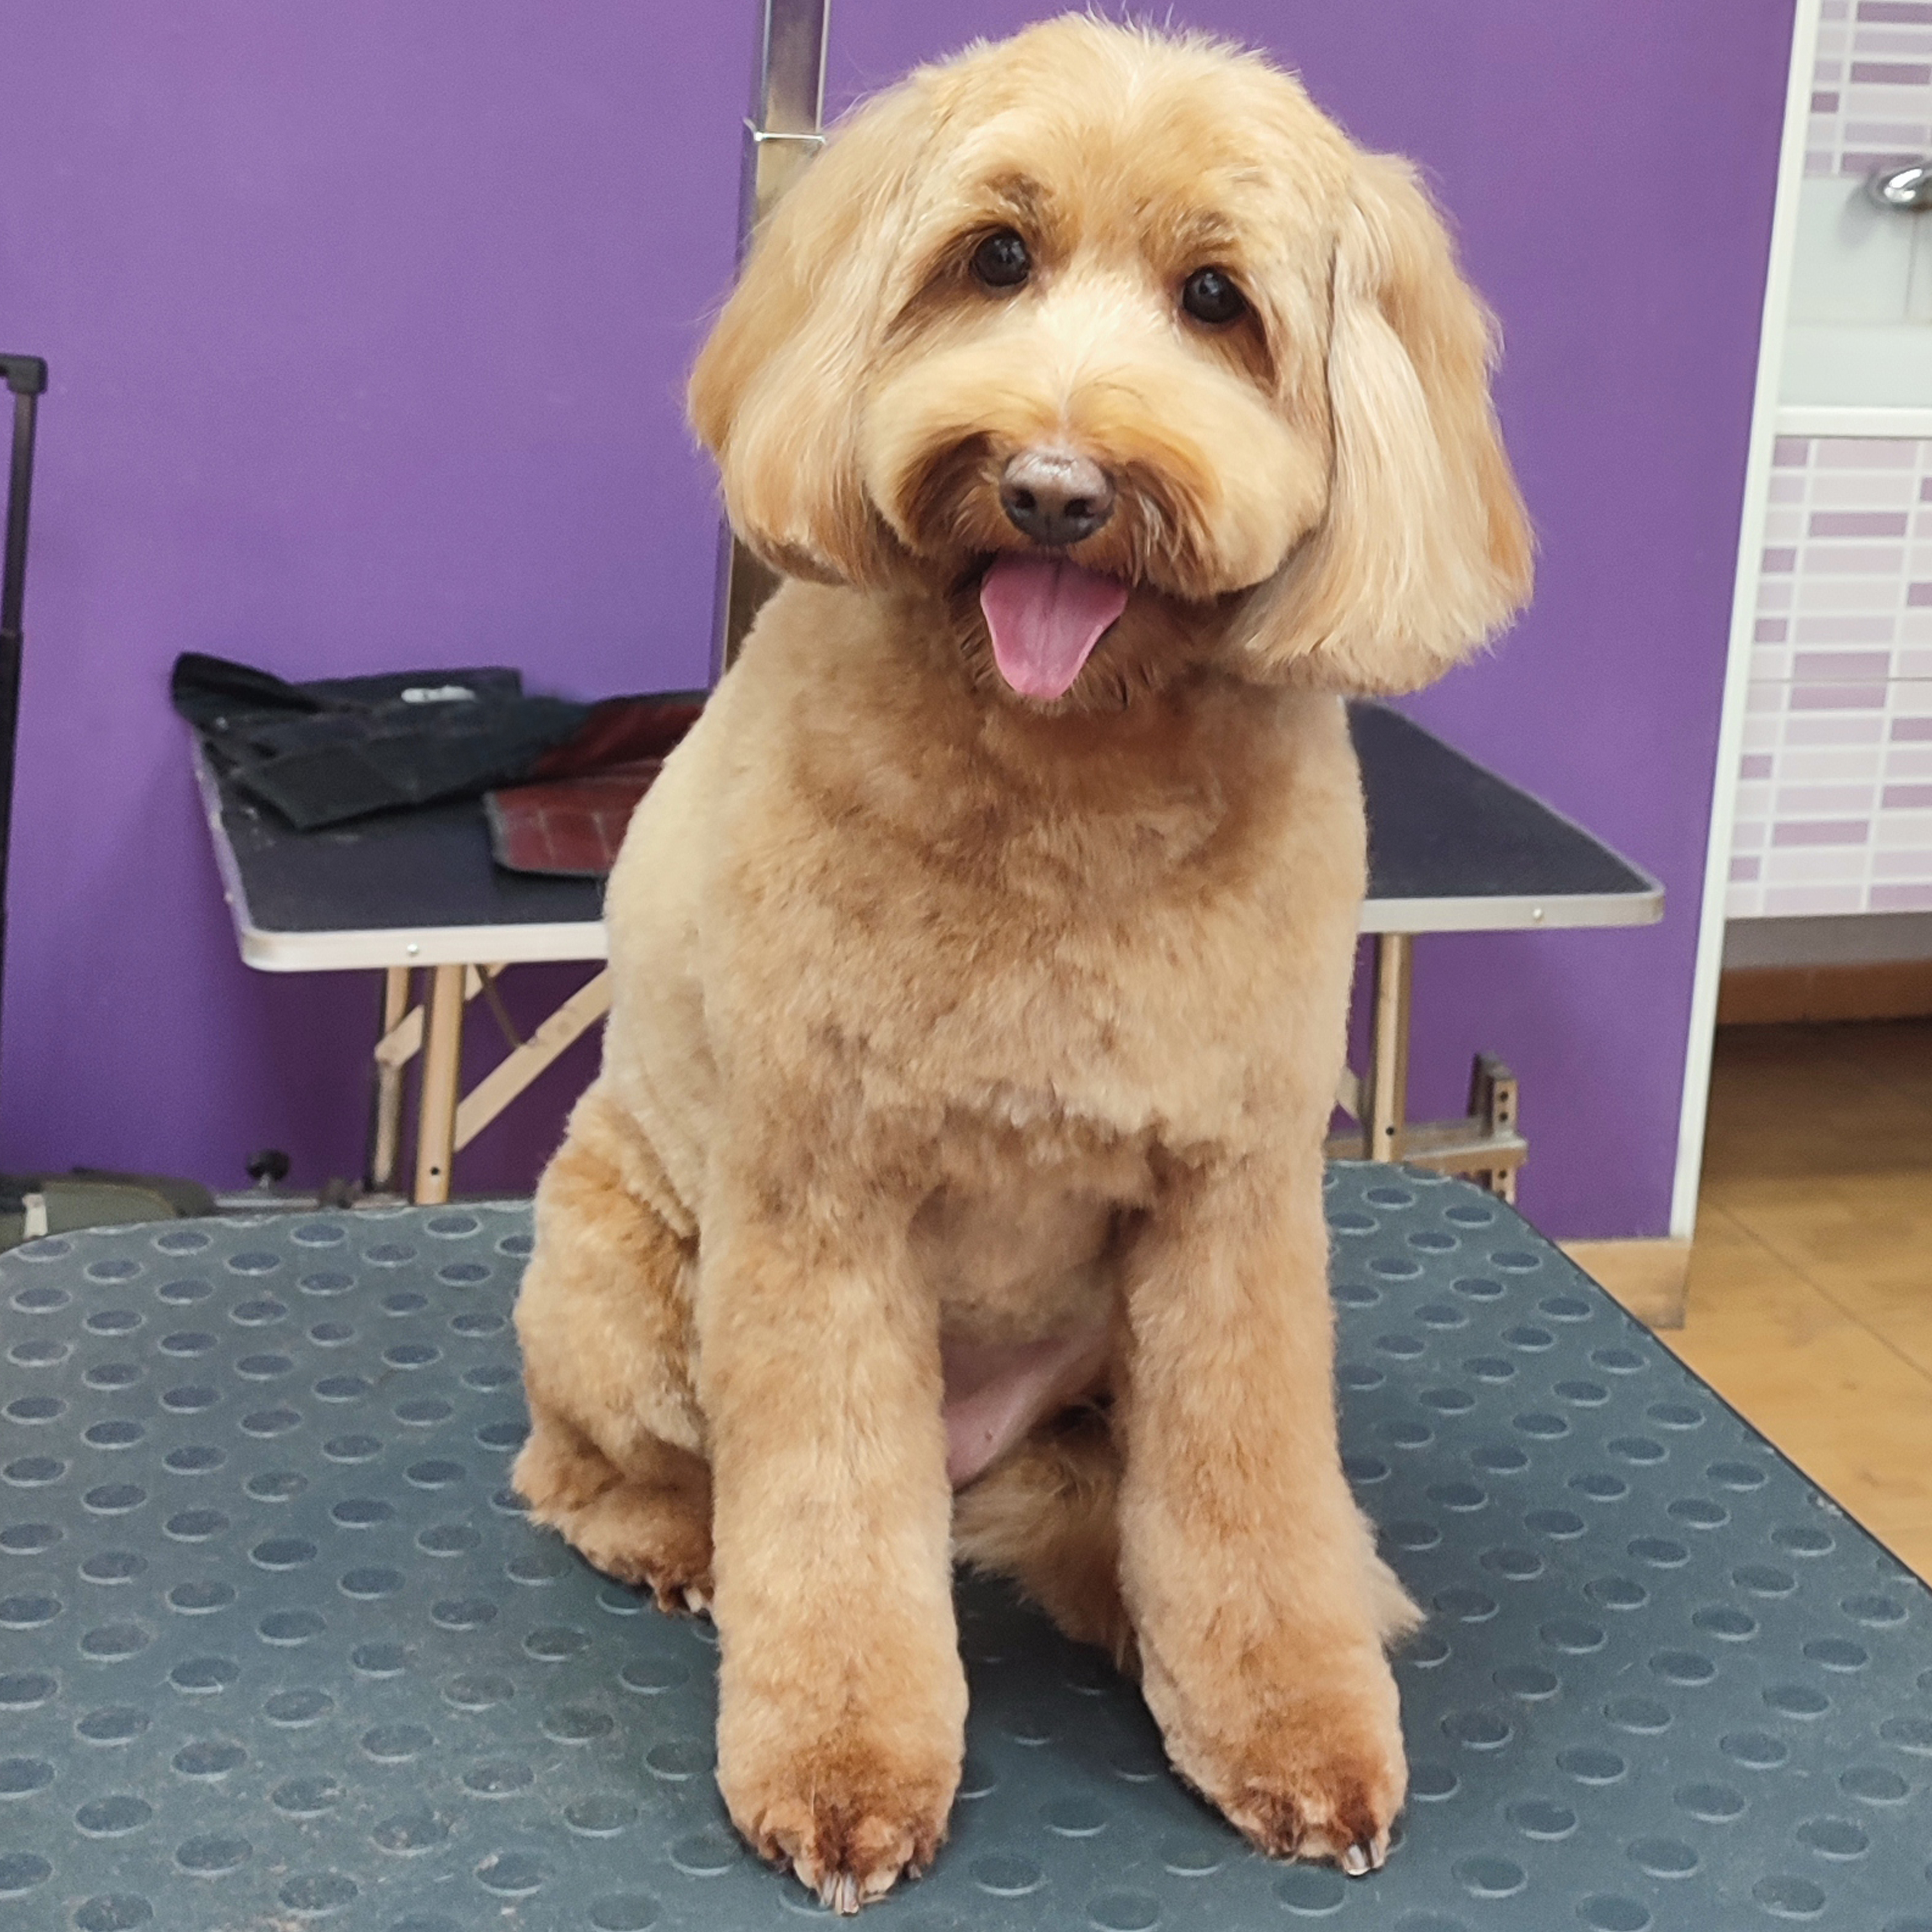 Friendly golden Doodle with fresh groom by Andis tools, sitting on green grooming mat in front of purple wall.